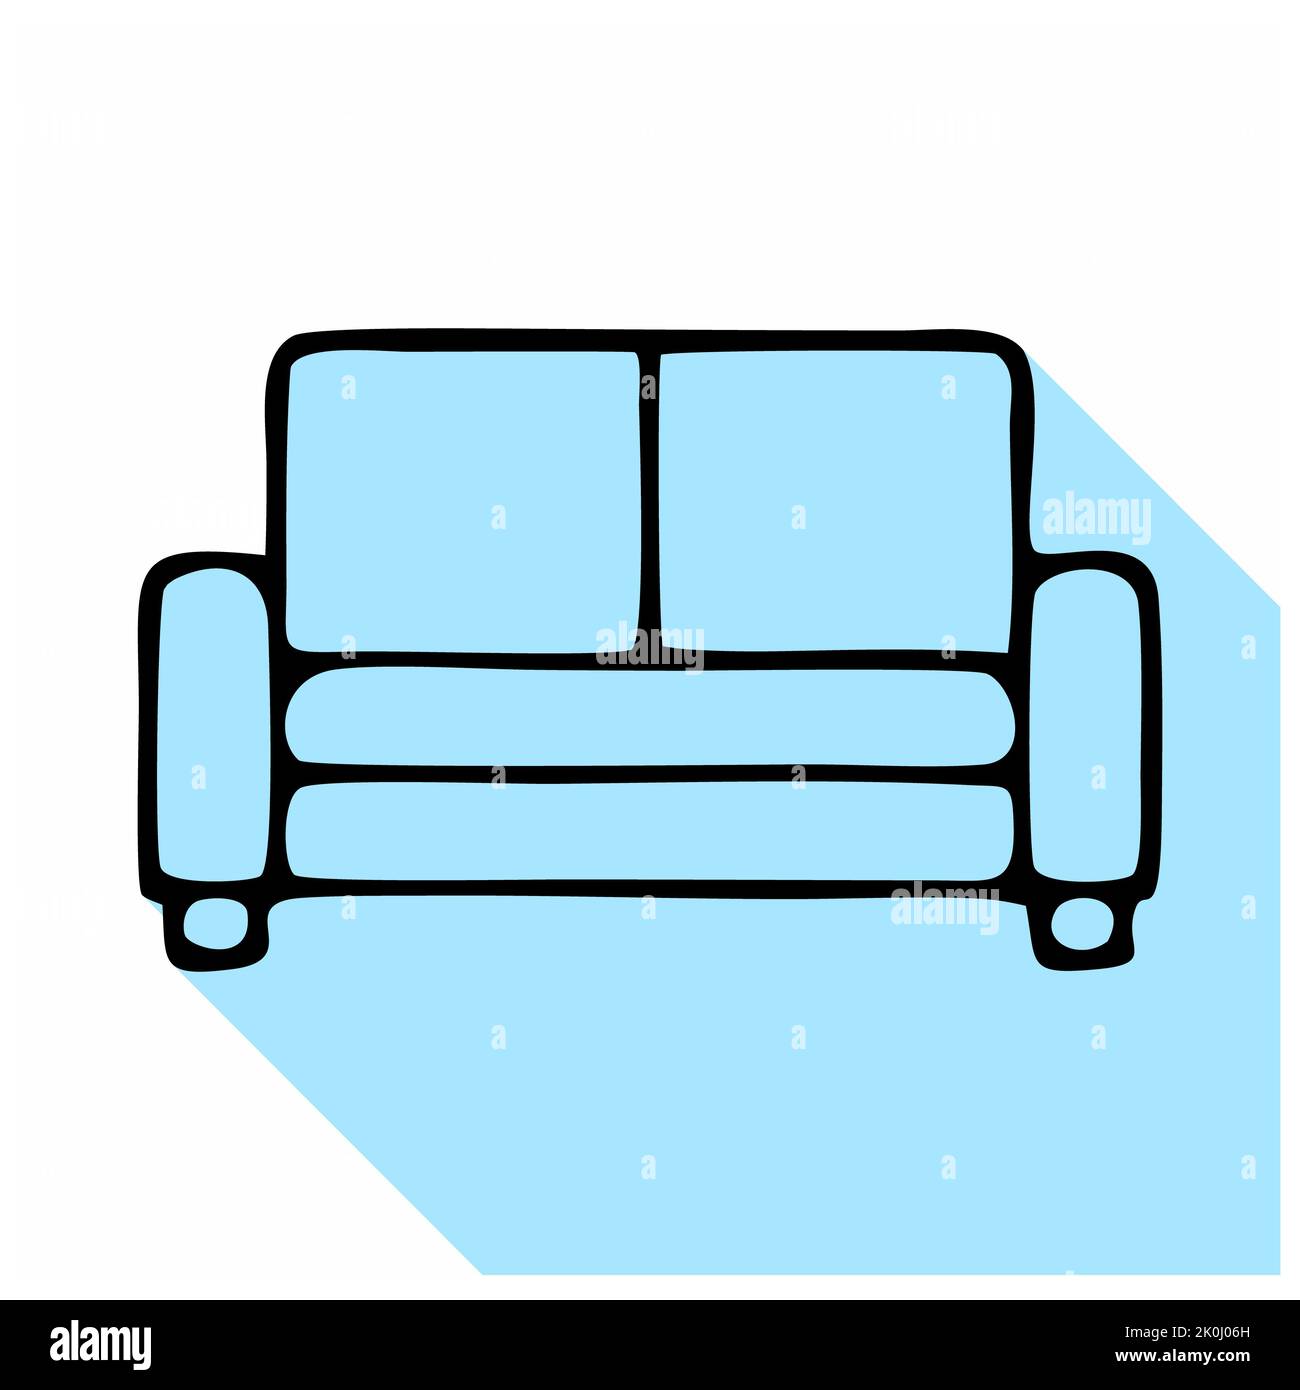 Sofa flat line icon. Apartment furniture sign, vector illustration of living room couch. Thin linear logo for interior store. Stock Photo